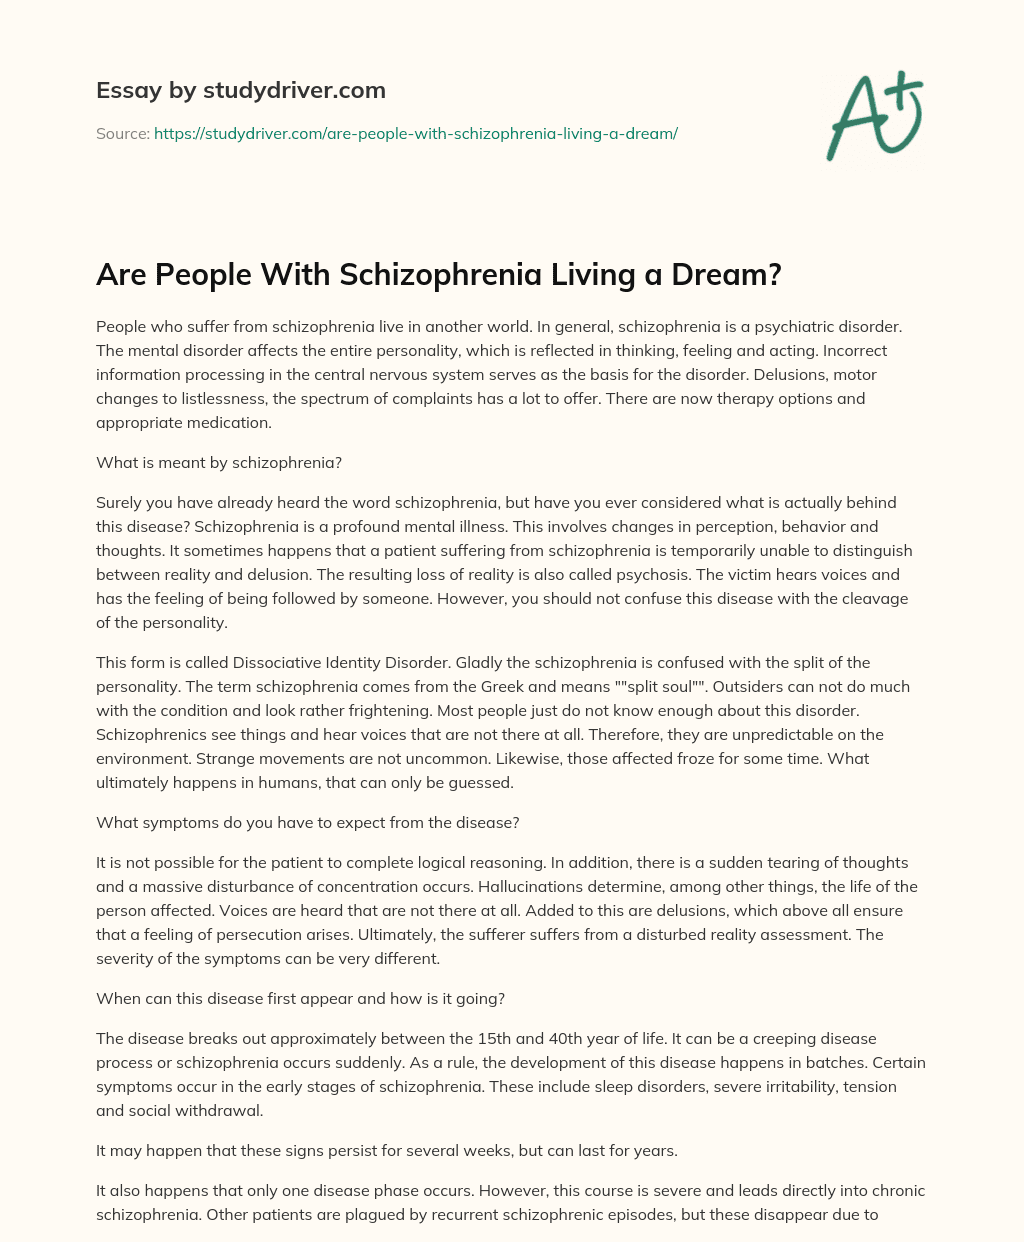 Are People with Schizophrenia Living a Dream? essay